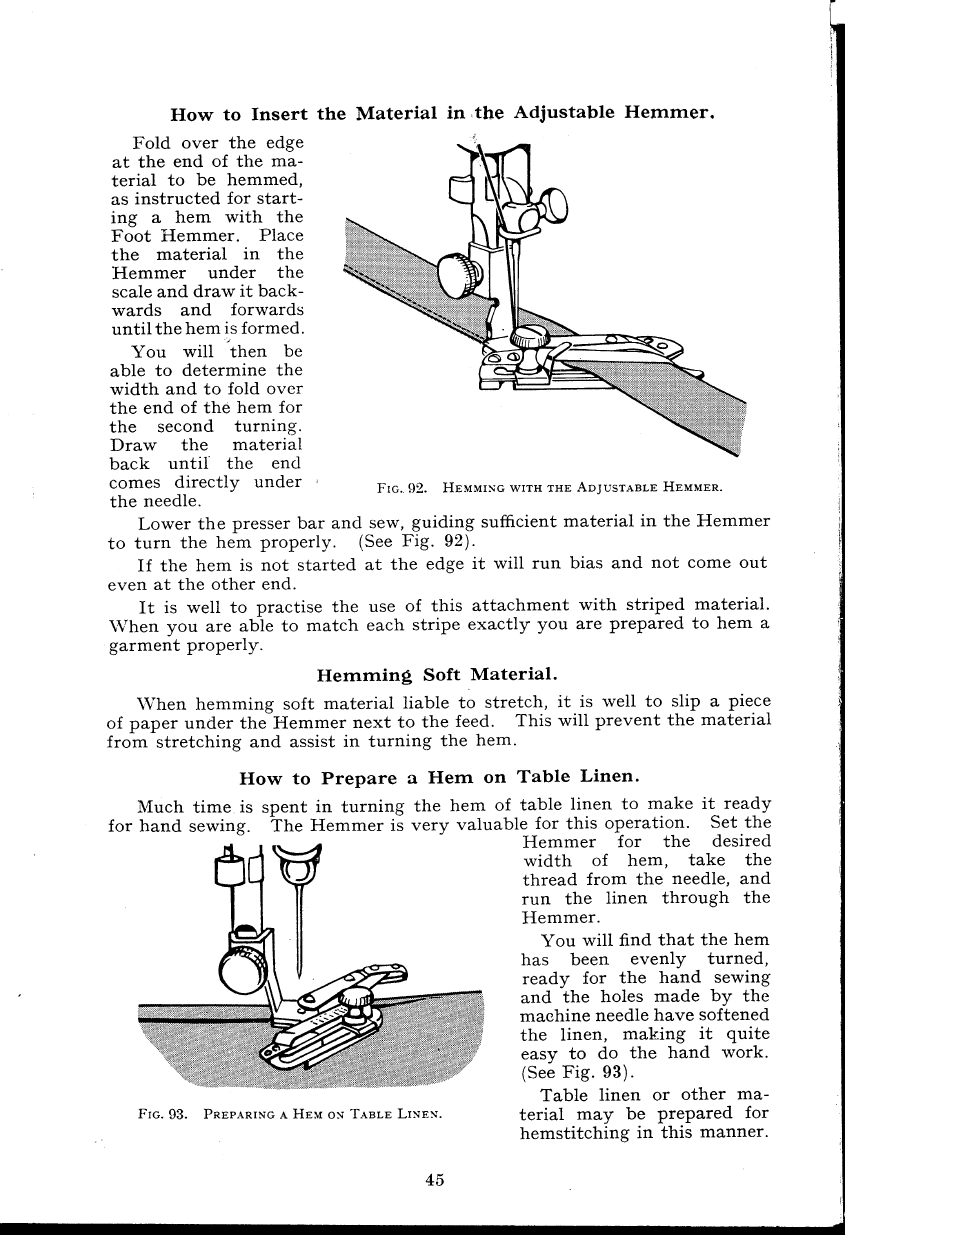 How to prepare a hem on table linen, Hemming soft material | SINGER 404K User Manual | Page 45 / 78